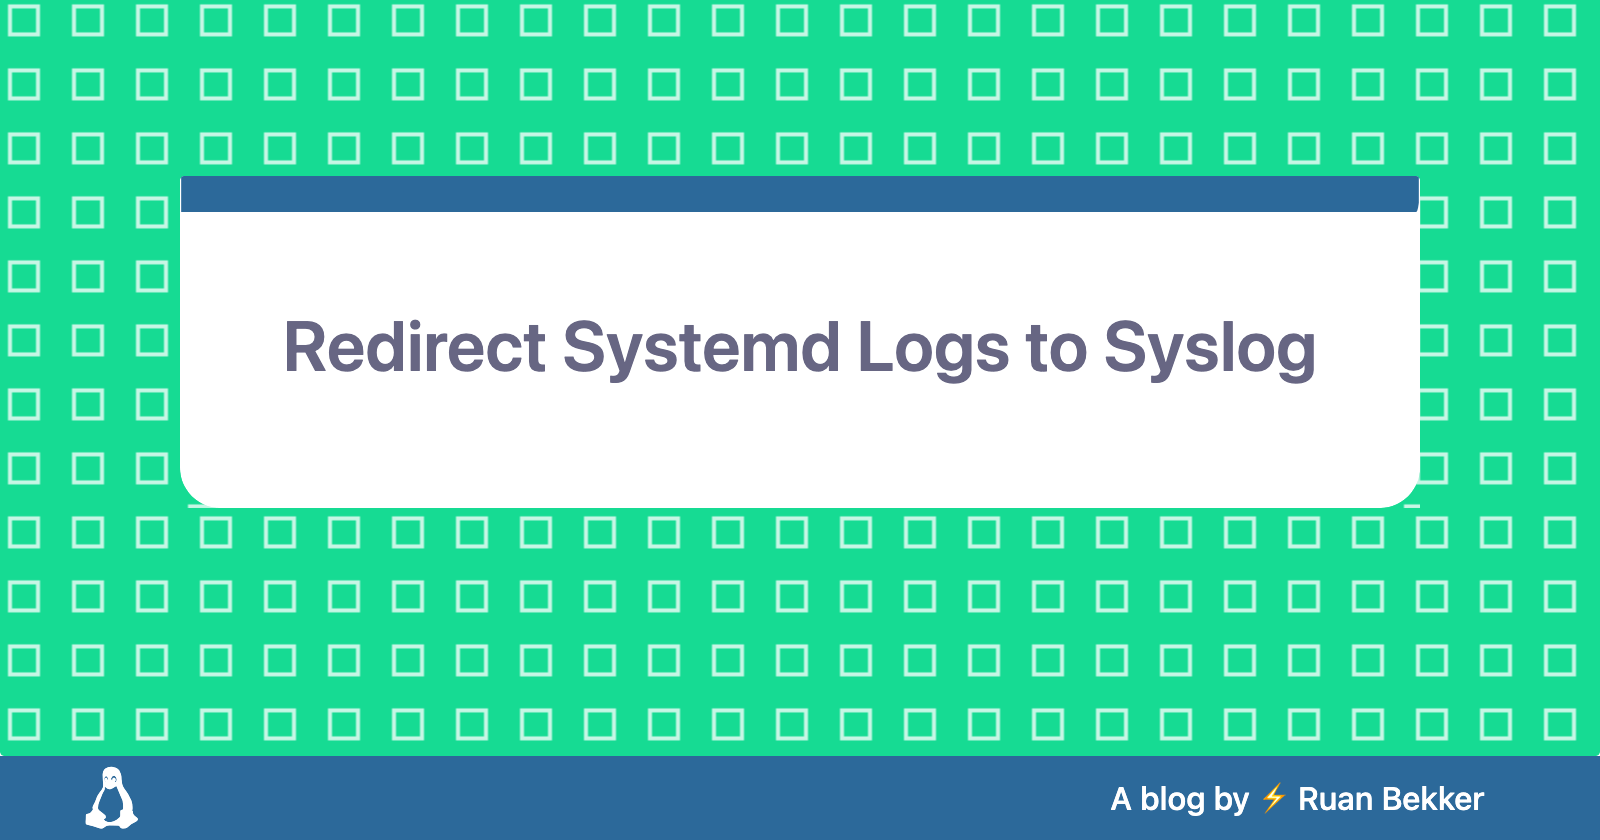 Redirect Systemd Unit Logs to Syslog